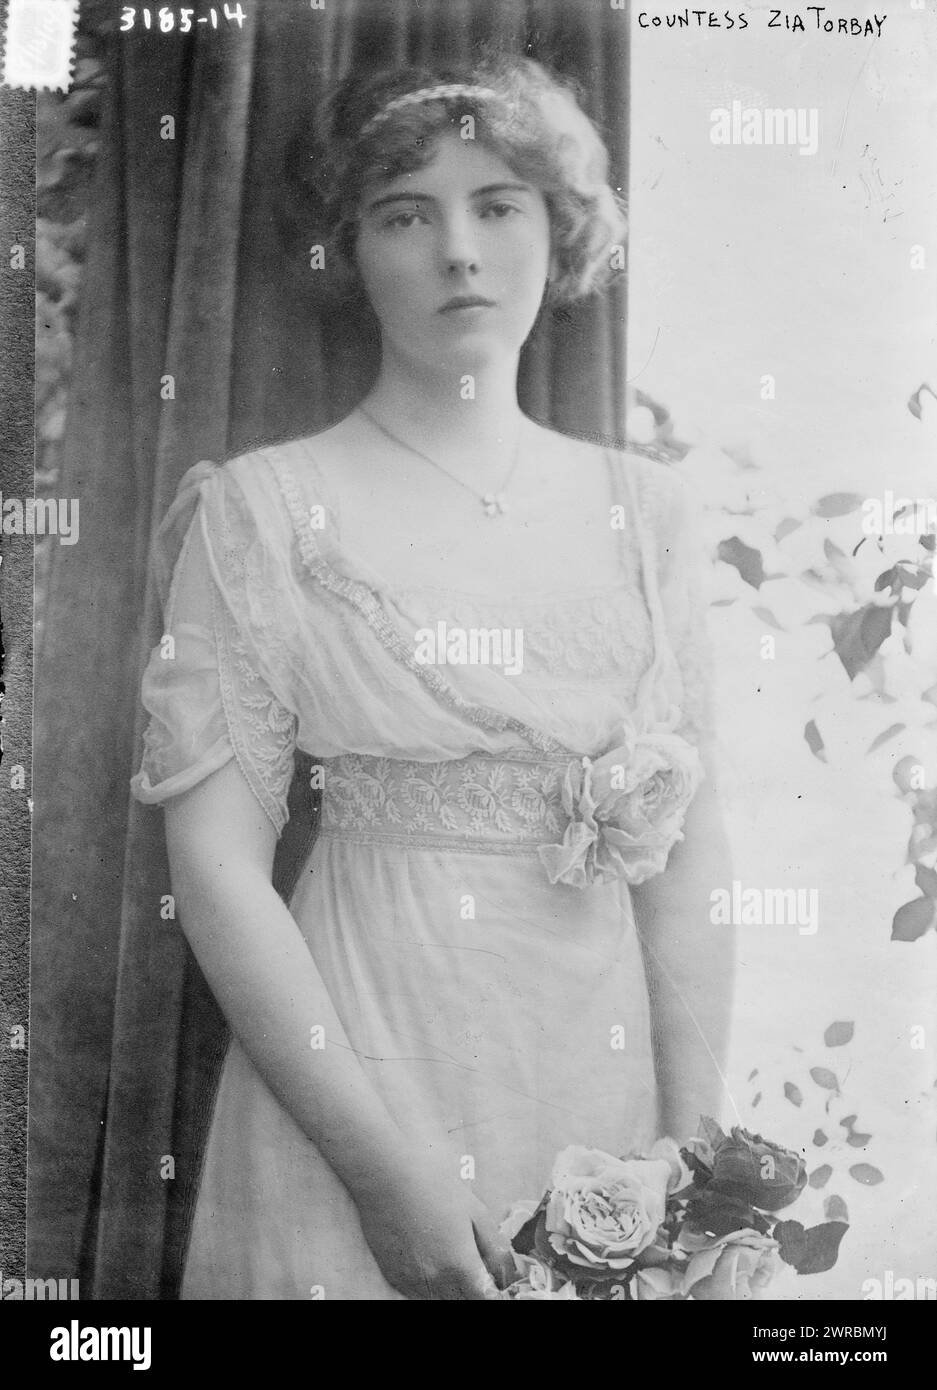 Countess Zia Torbay, Photograph shows Countess Anastasia Mikhailovna de Torby (1892-1977) (Lady Zia Wernher) who was the daughter of Grand Duke Michael Mikhailovich of Russia and his wife Sophie, Countess von Merenberg., 1914 Aug. 13, Glass negatives, 1 negative: glass Stock Photo